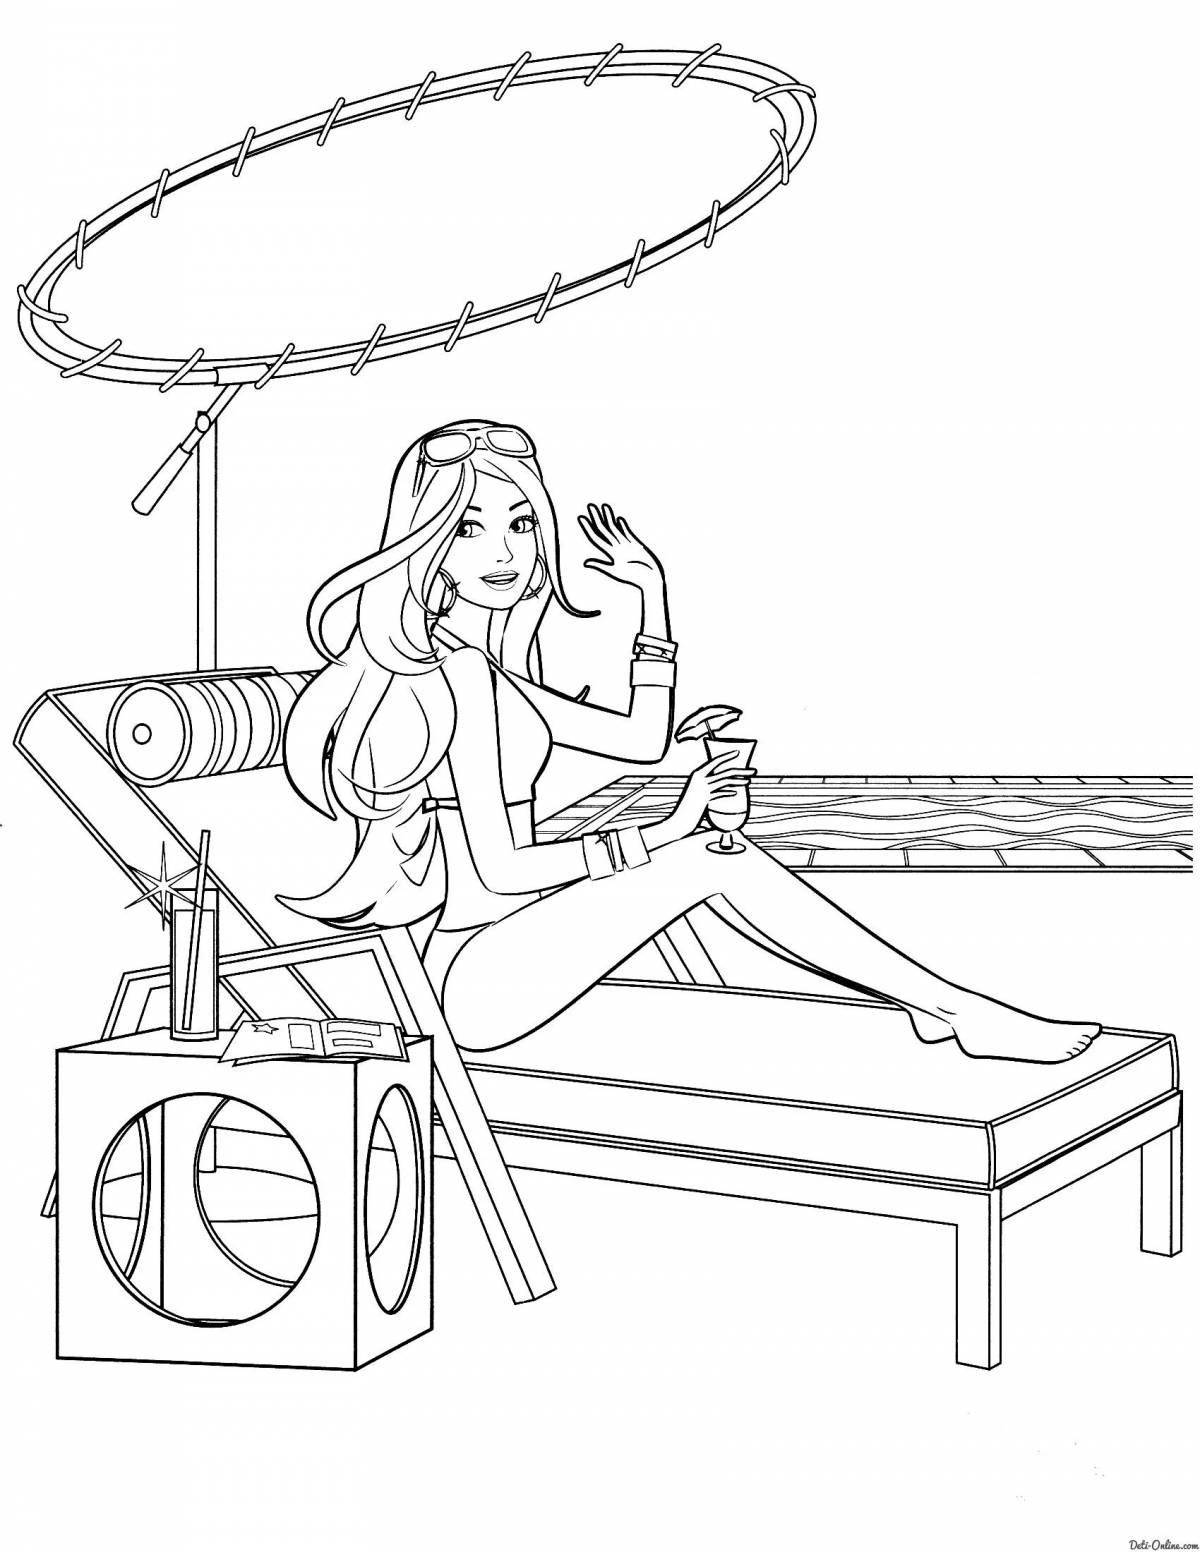 Animated coloring page with barbie projector